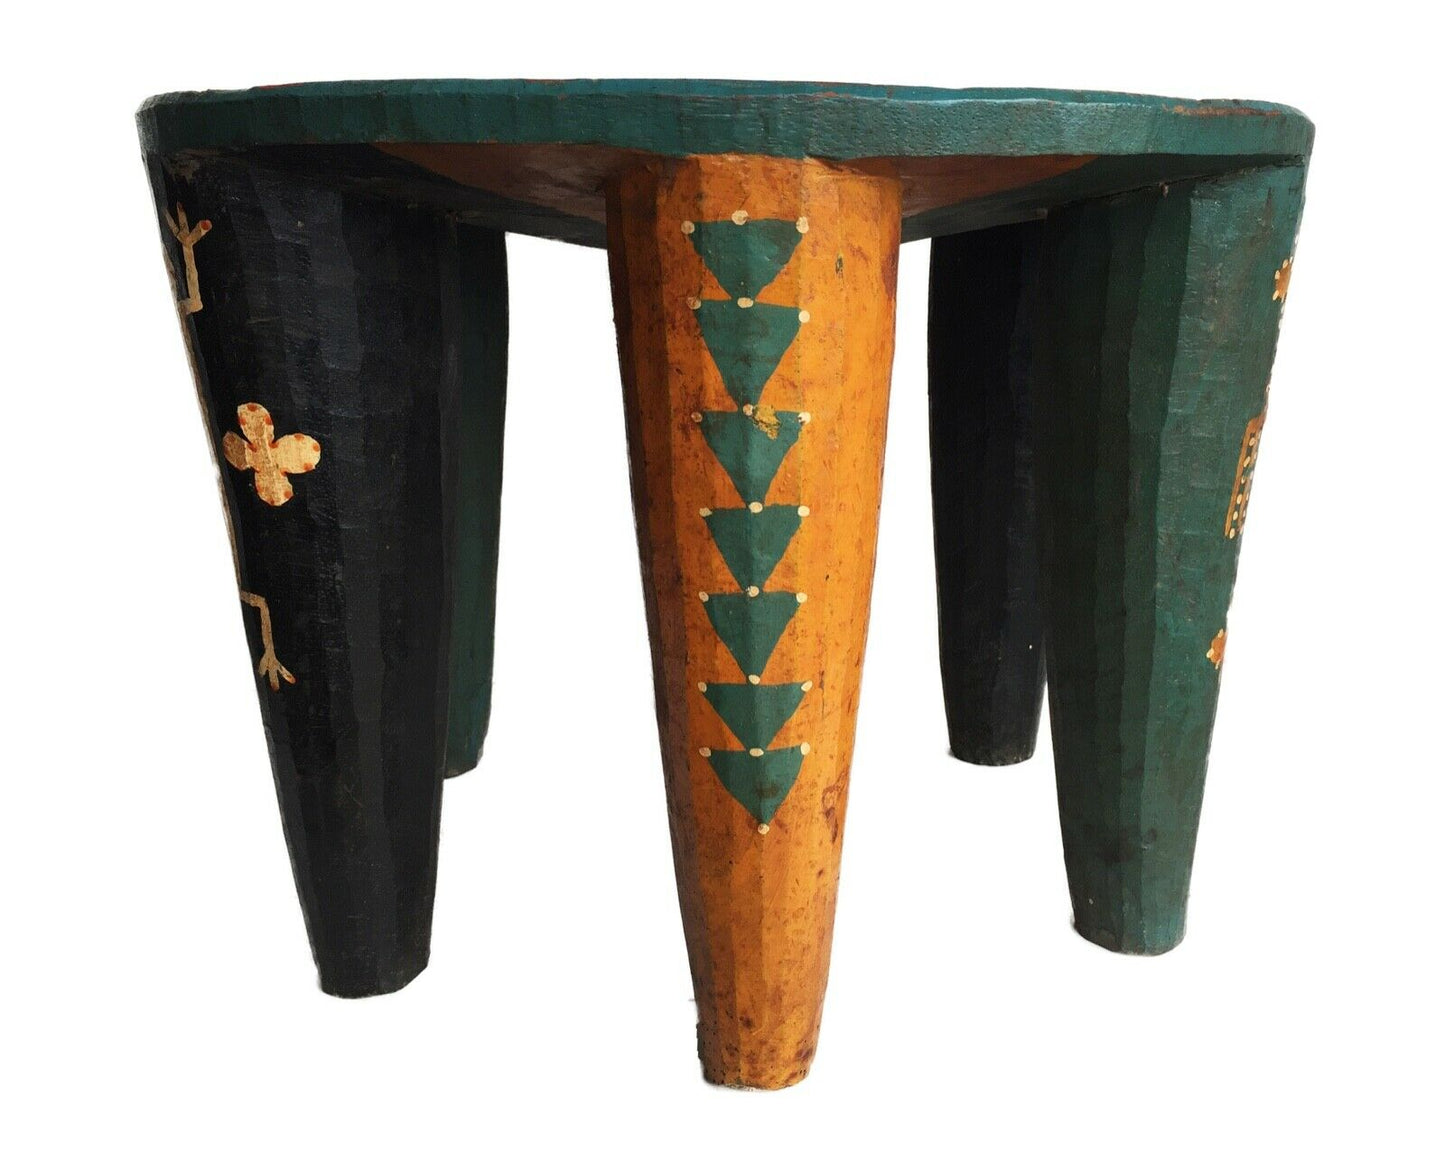 #2143 Superb African LG Colorful  Nupe Stool Nigeria  13" h by 17.5" w